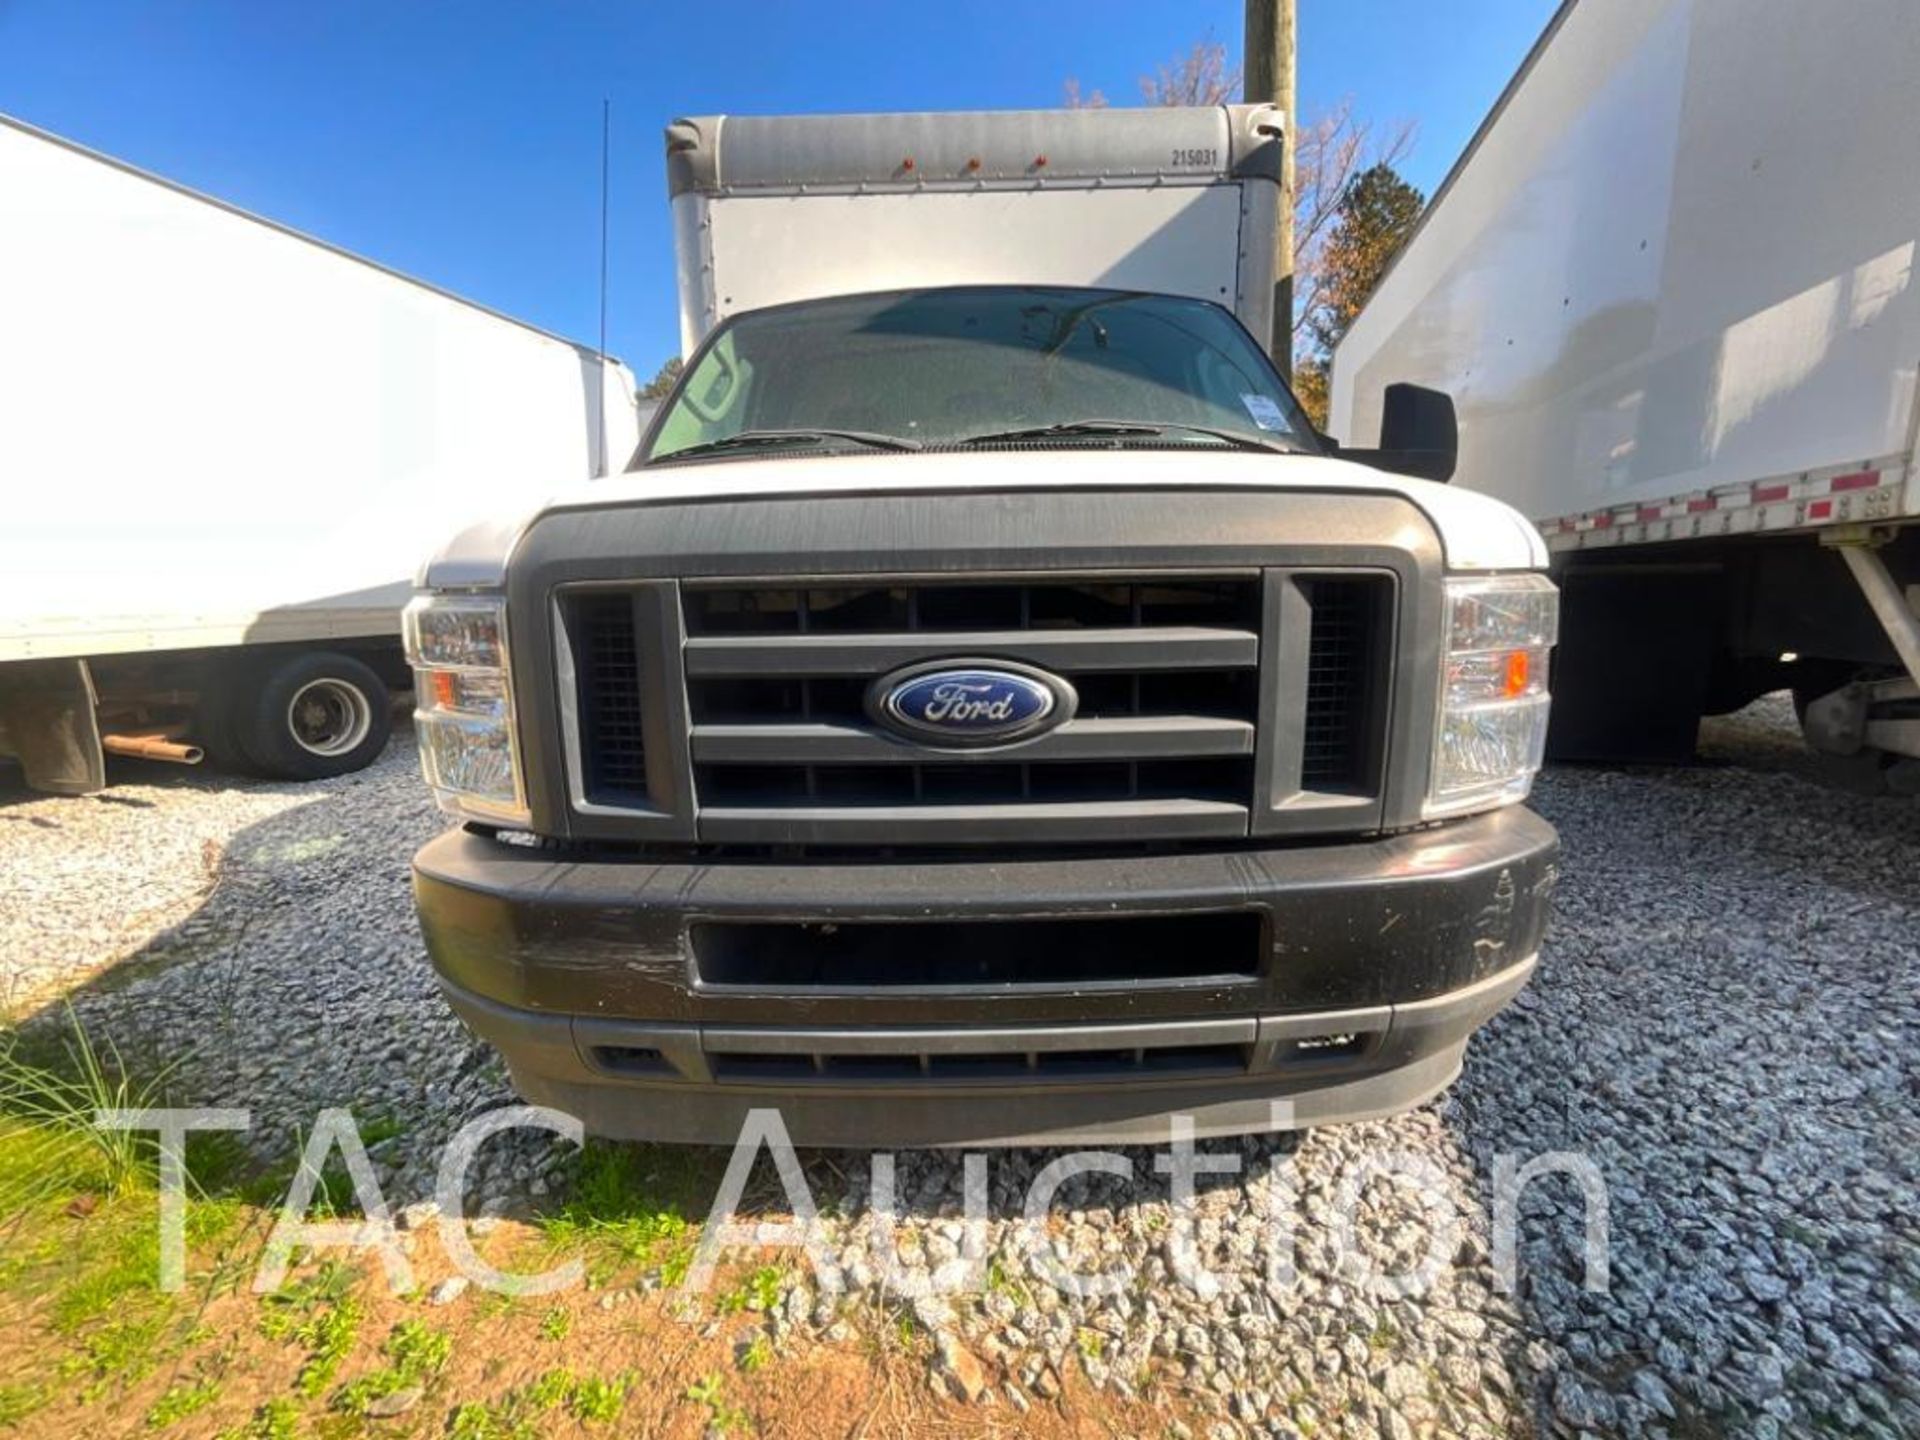 2021 Ford E-350 16ft Box Truck - Image 2 of 44